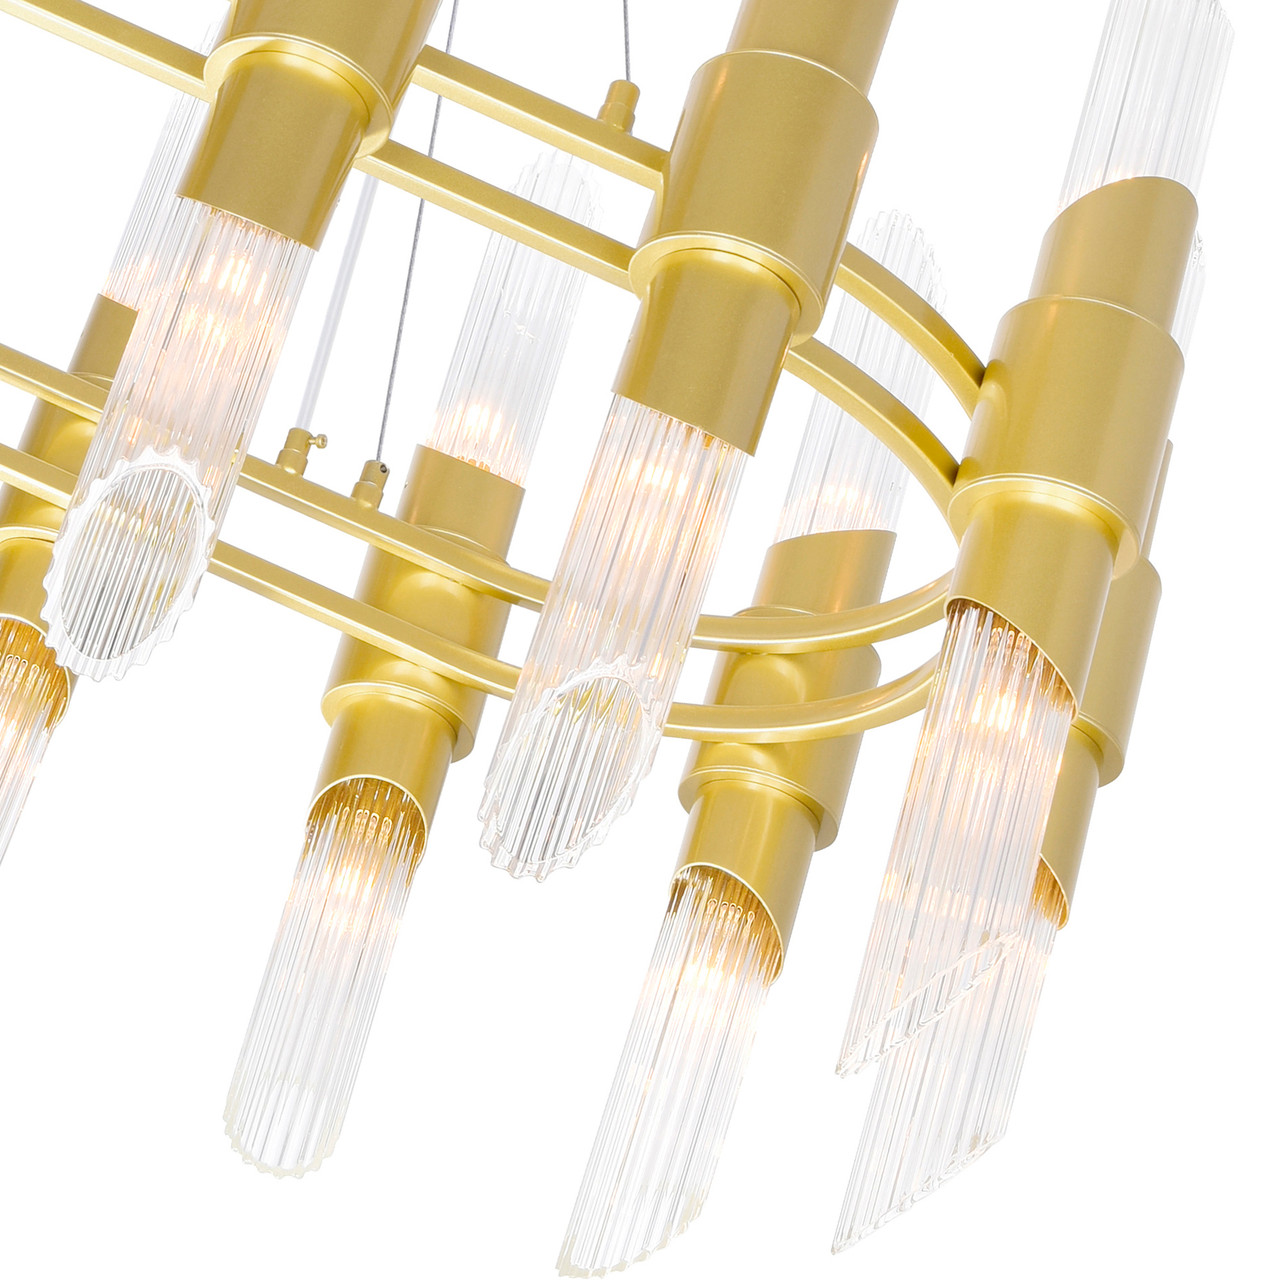 CWI LIGHTING 1269P39-28-602-O 28 Light Chandelier with Satin Gold finish